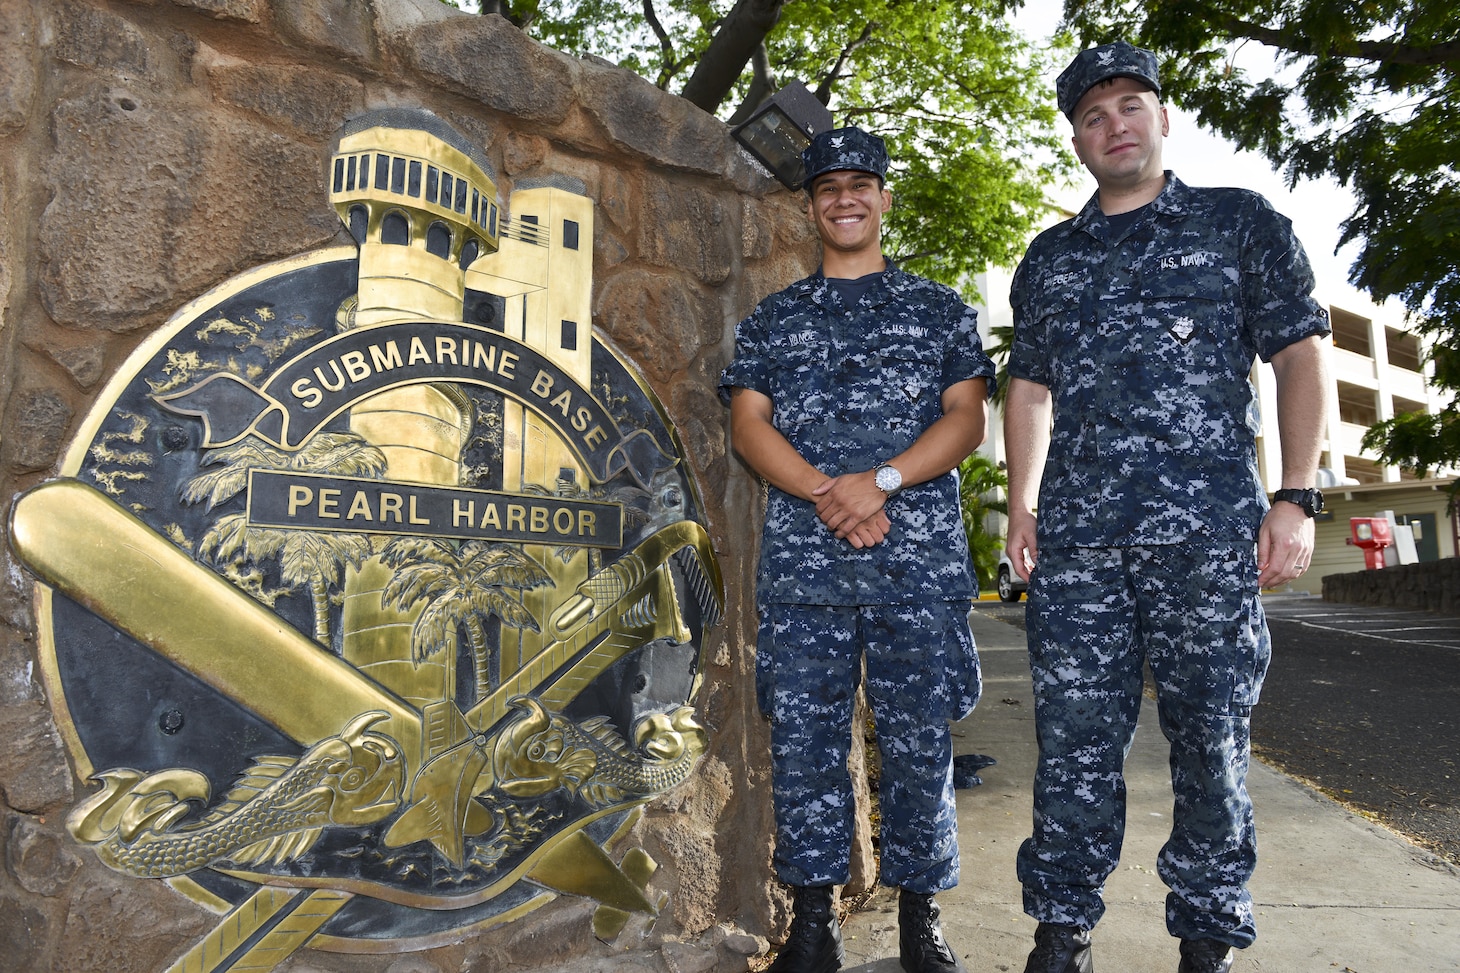 160518-N-LY160-032
JOINT BASE PEARL HARBOR-HICKAM, Hawaii (May 18, 2016) – Hospital Corpsman 3rd Class Michael D. Vance, left, and Hospital Corpsman 2nd Class Seth Sweger, right, behavioral health technicians, pose next to the Submarine Base Pearl Harbor crest at Joint Base Pearl Harbor-Hickam. (U.S. Navy photo by Mass Communication Specialist 2nd Class Michael H. Lee)